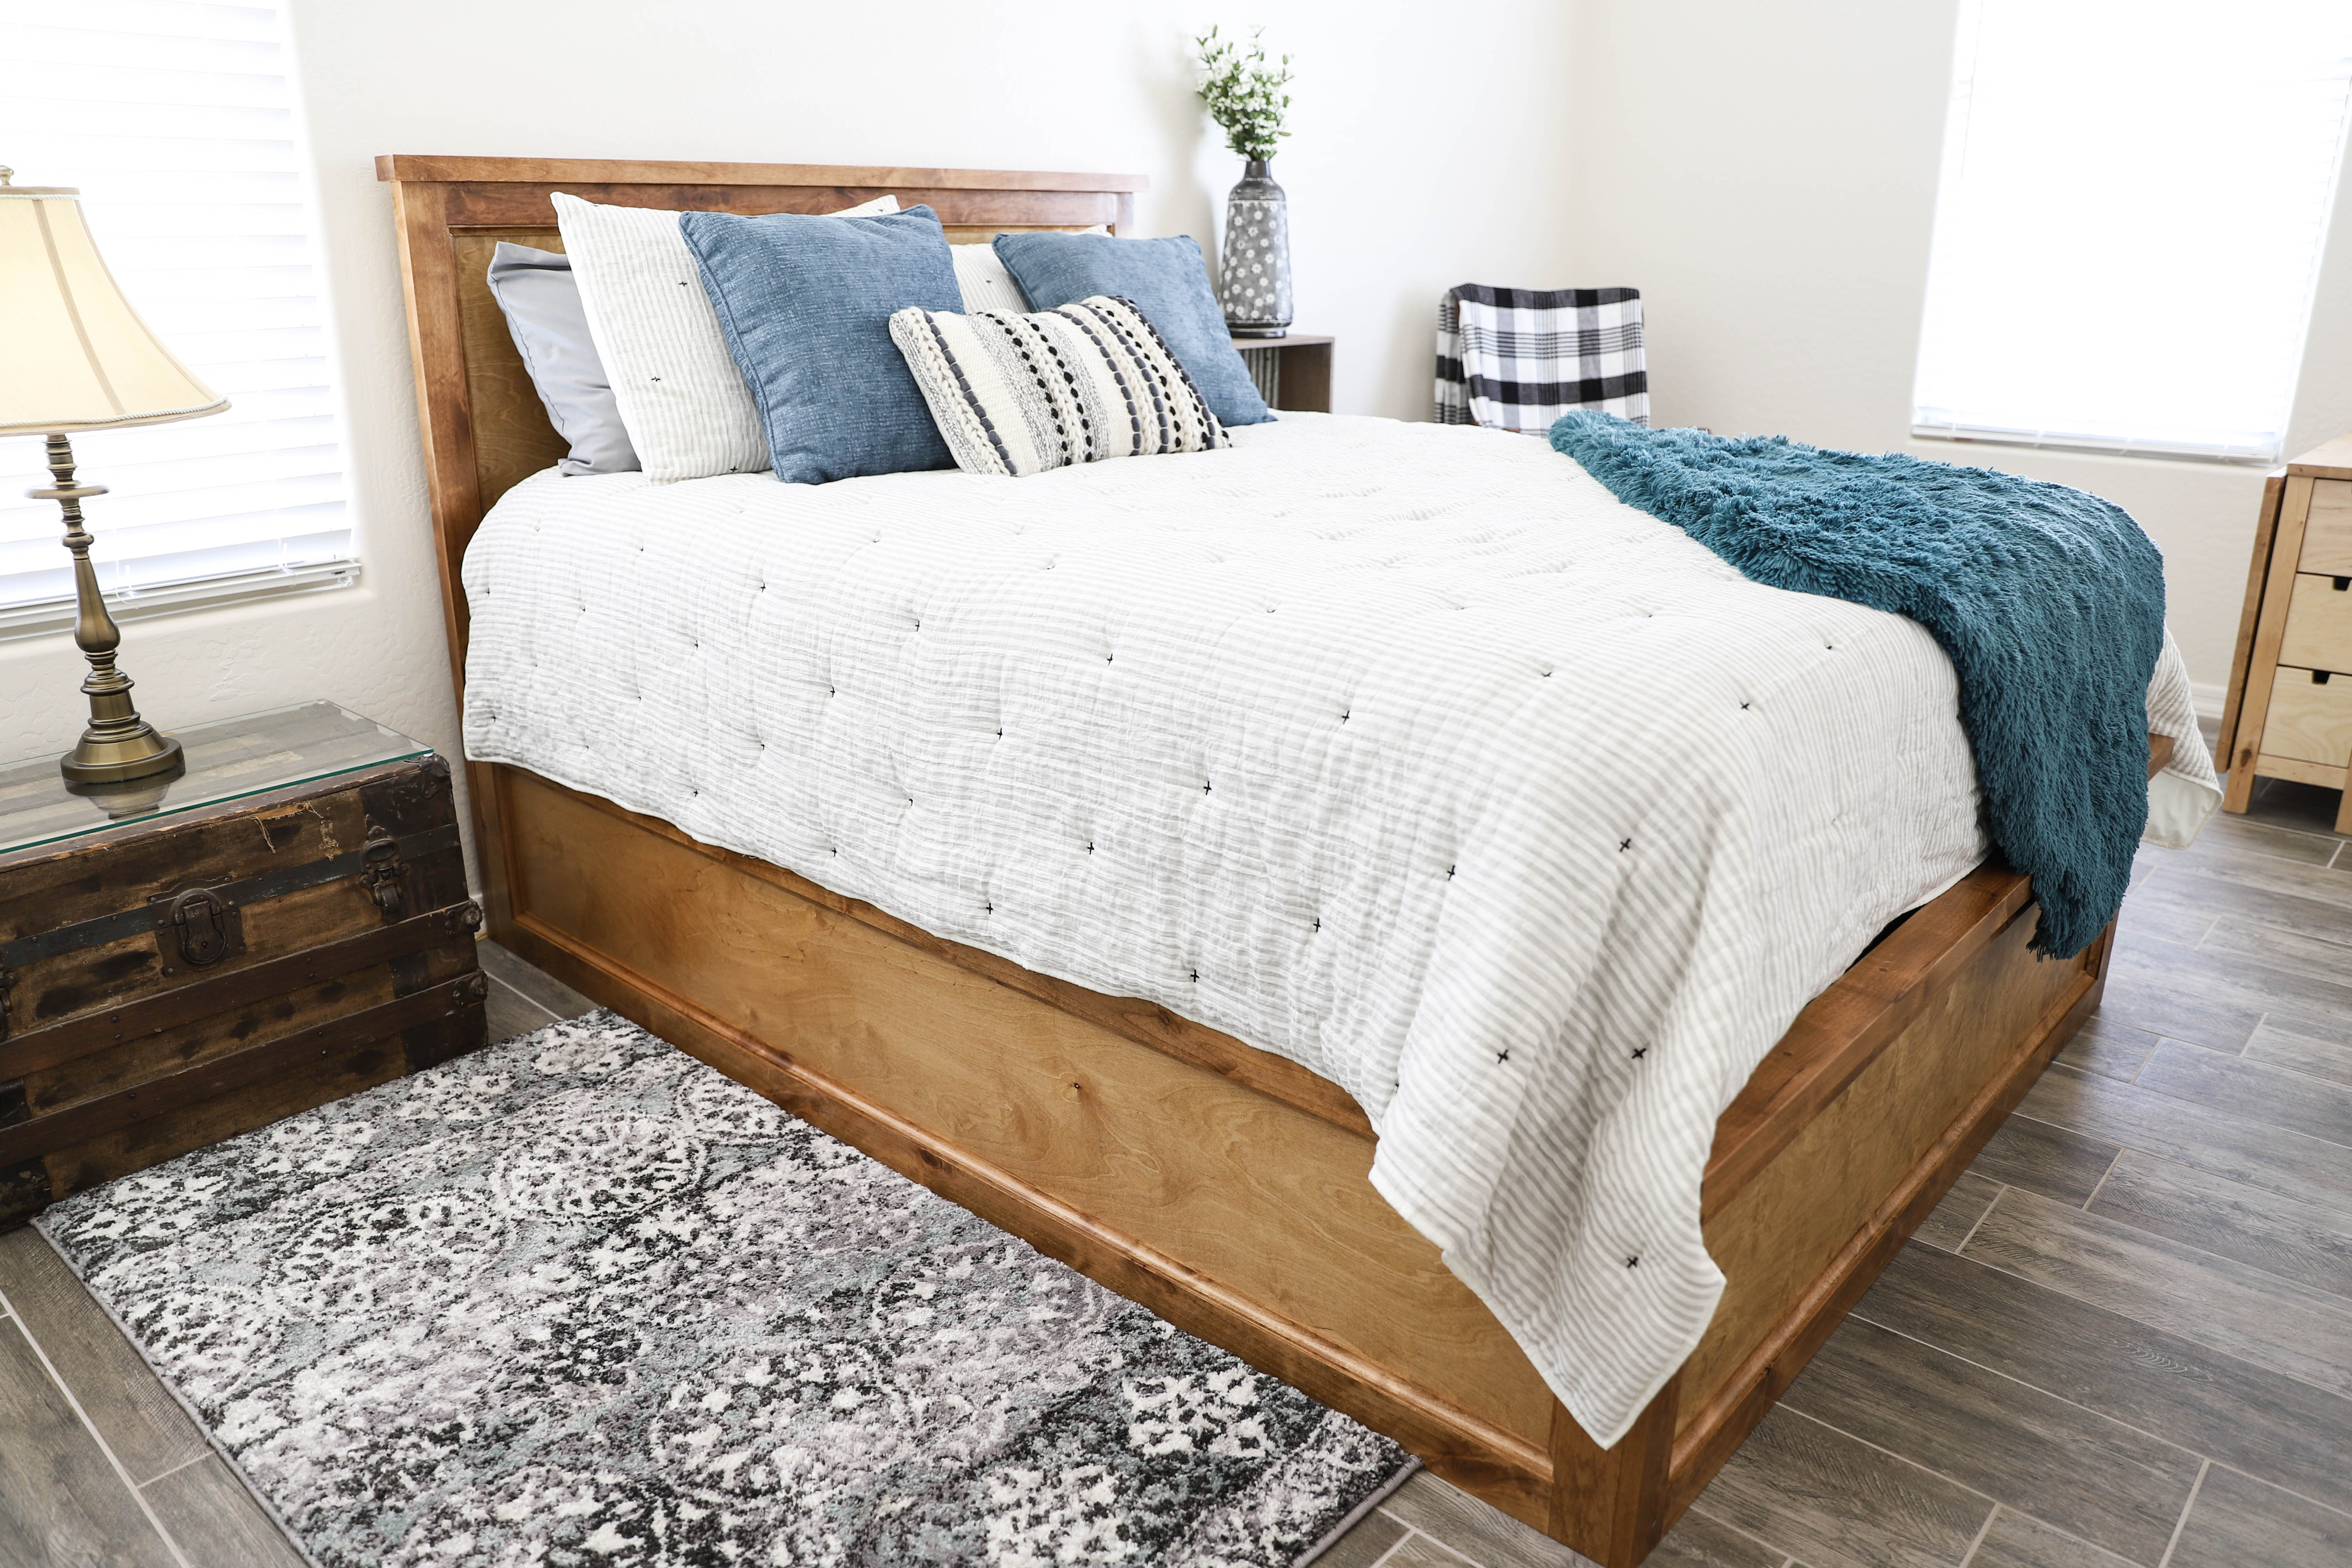 How To Build A Queen Size Storage Bed, Diy Rustic Queen Bed Frame With Storage Boxes White